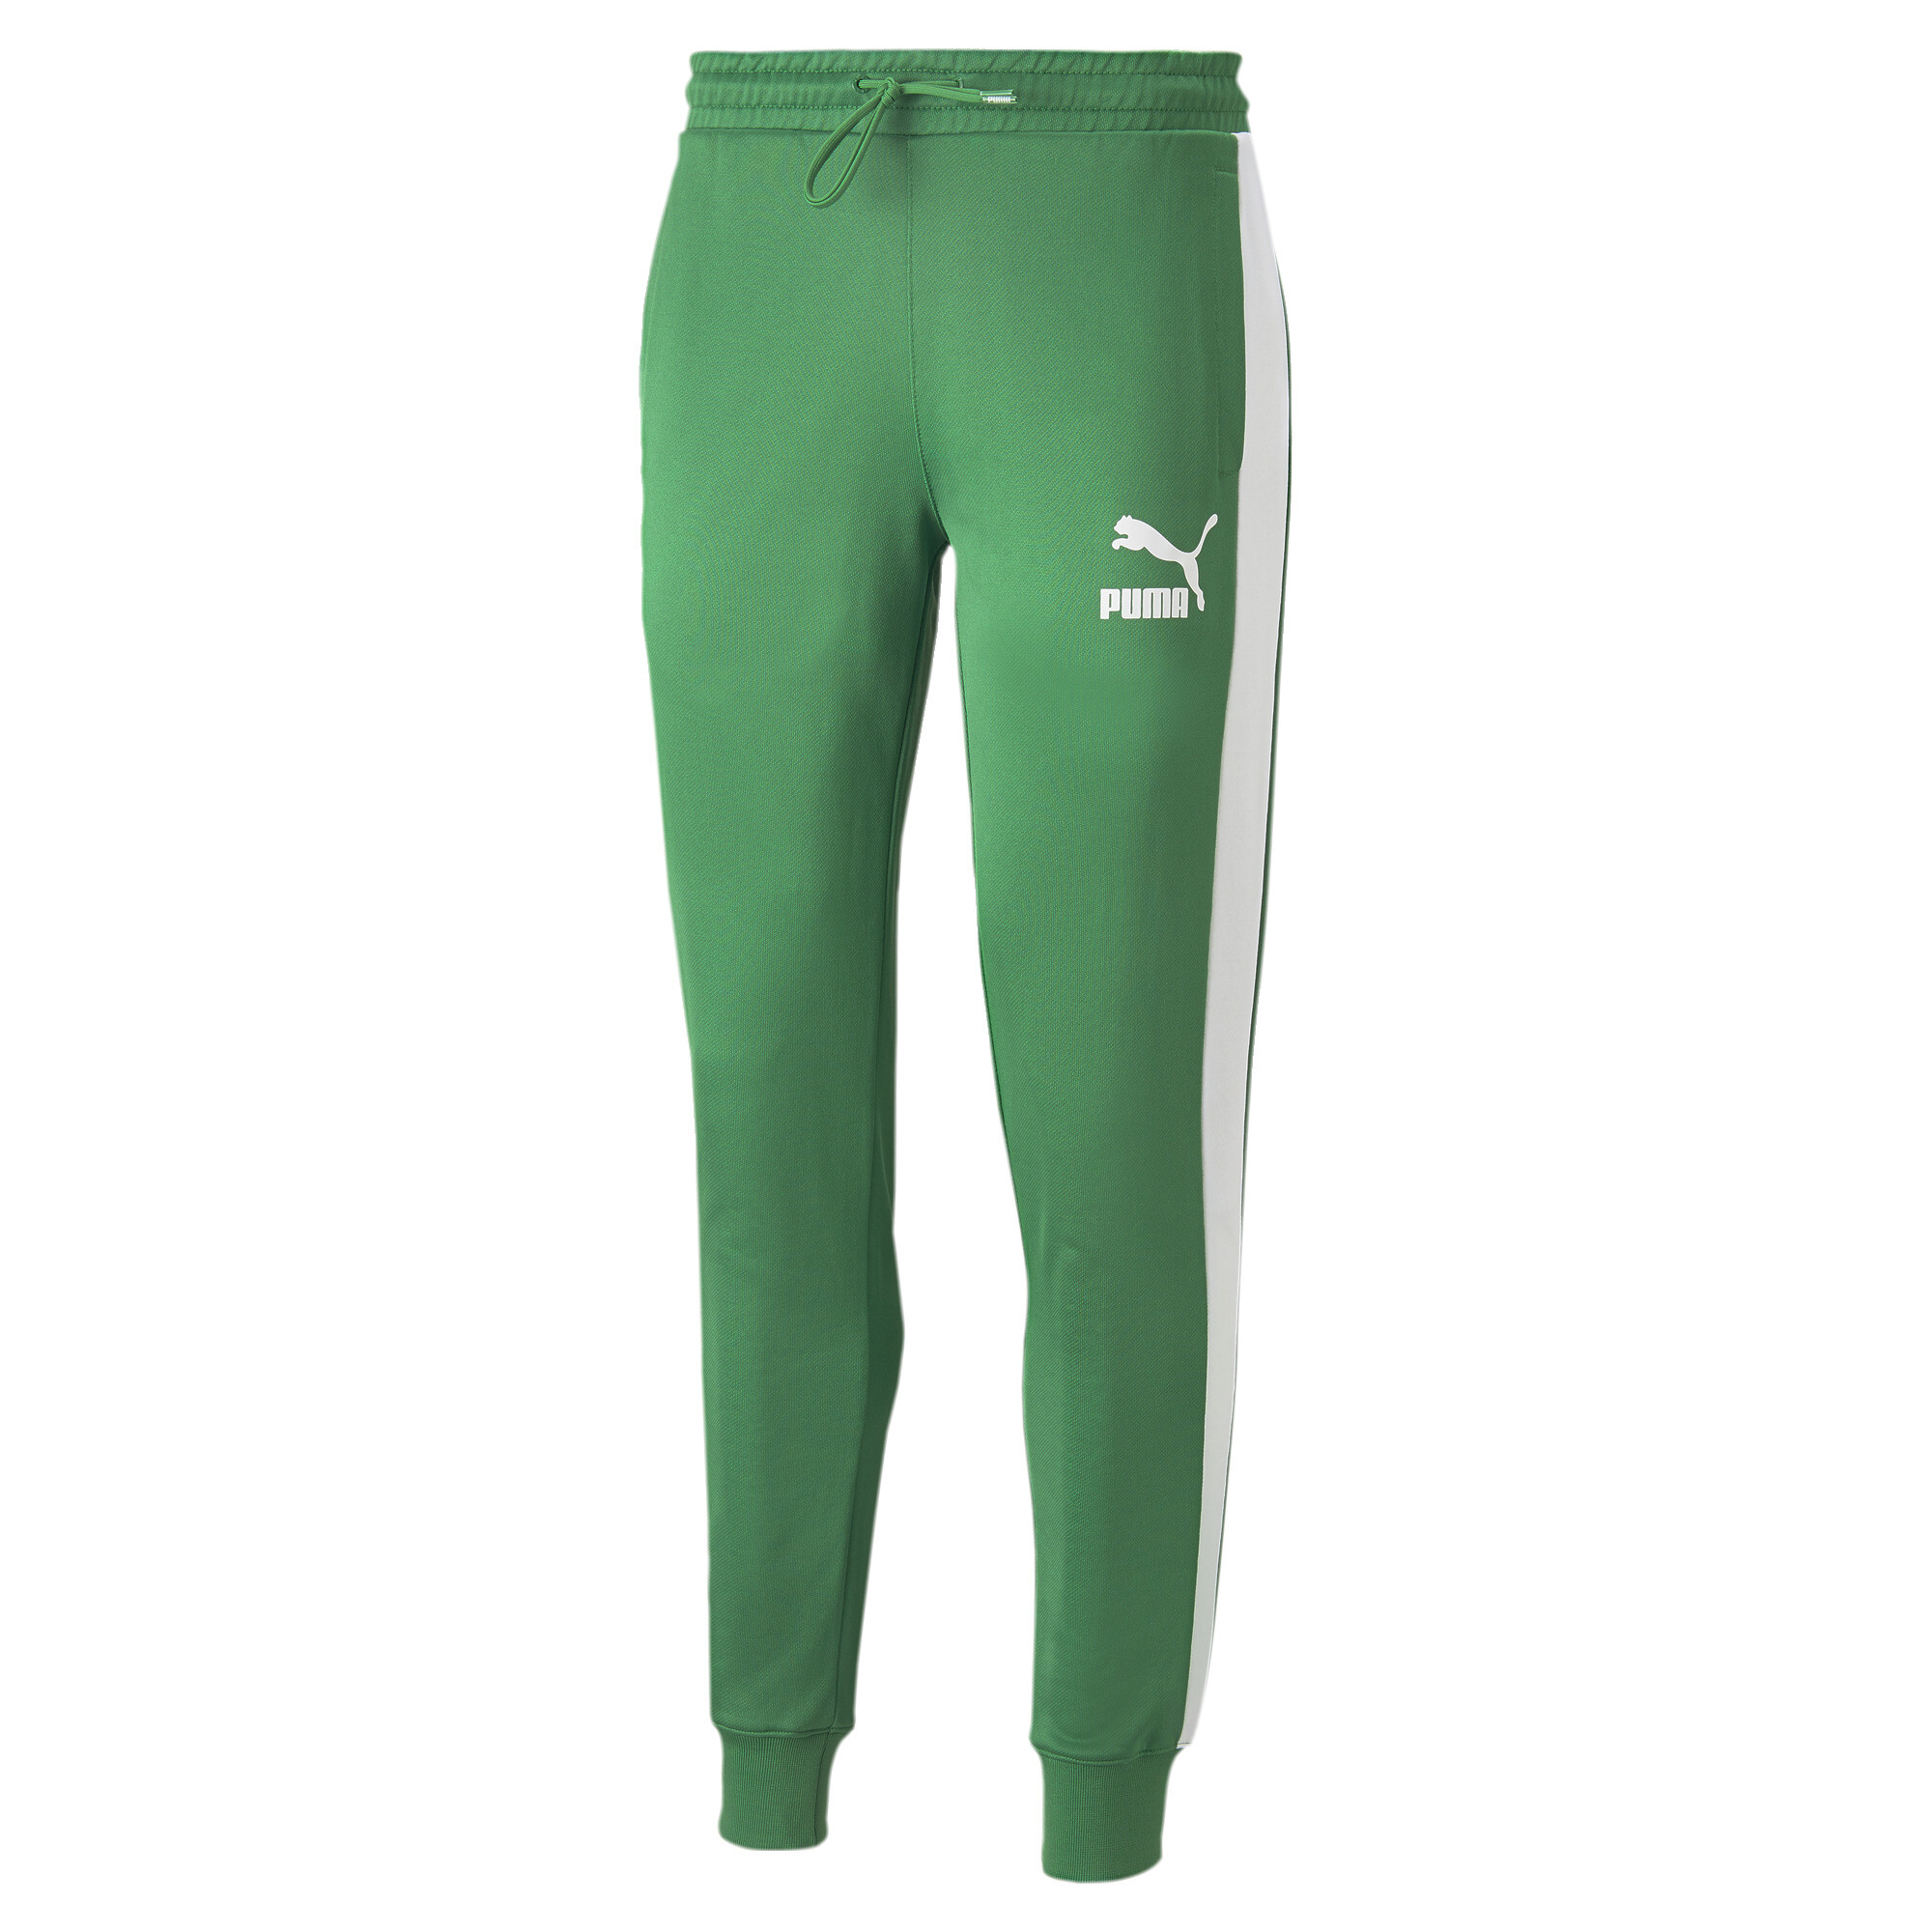 Men's Puma Iconic T7's Track Pants, Green, Size 3XL, Clothing